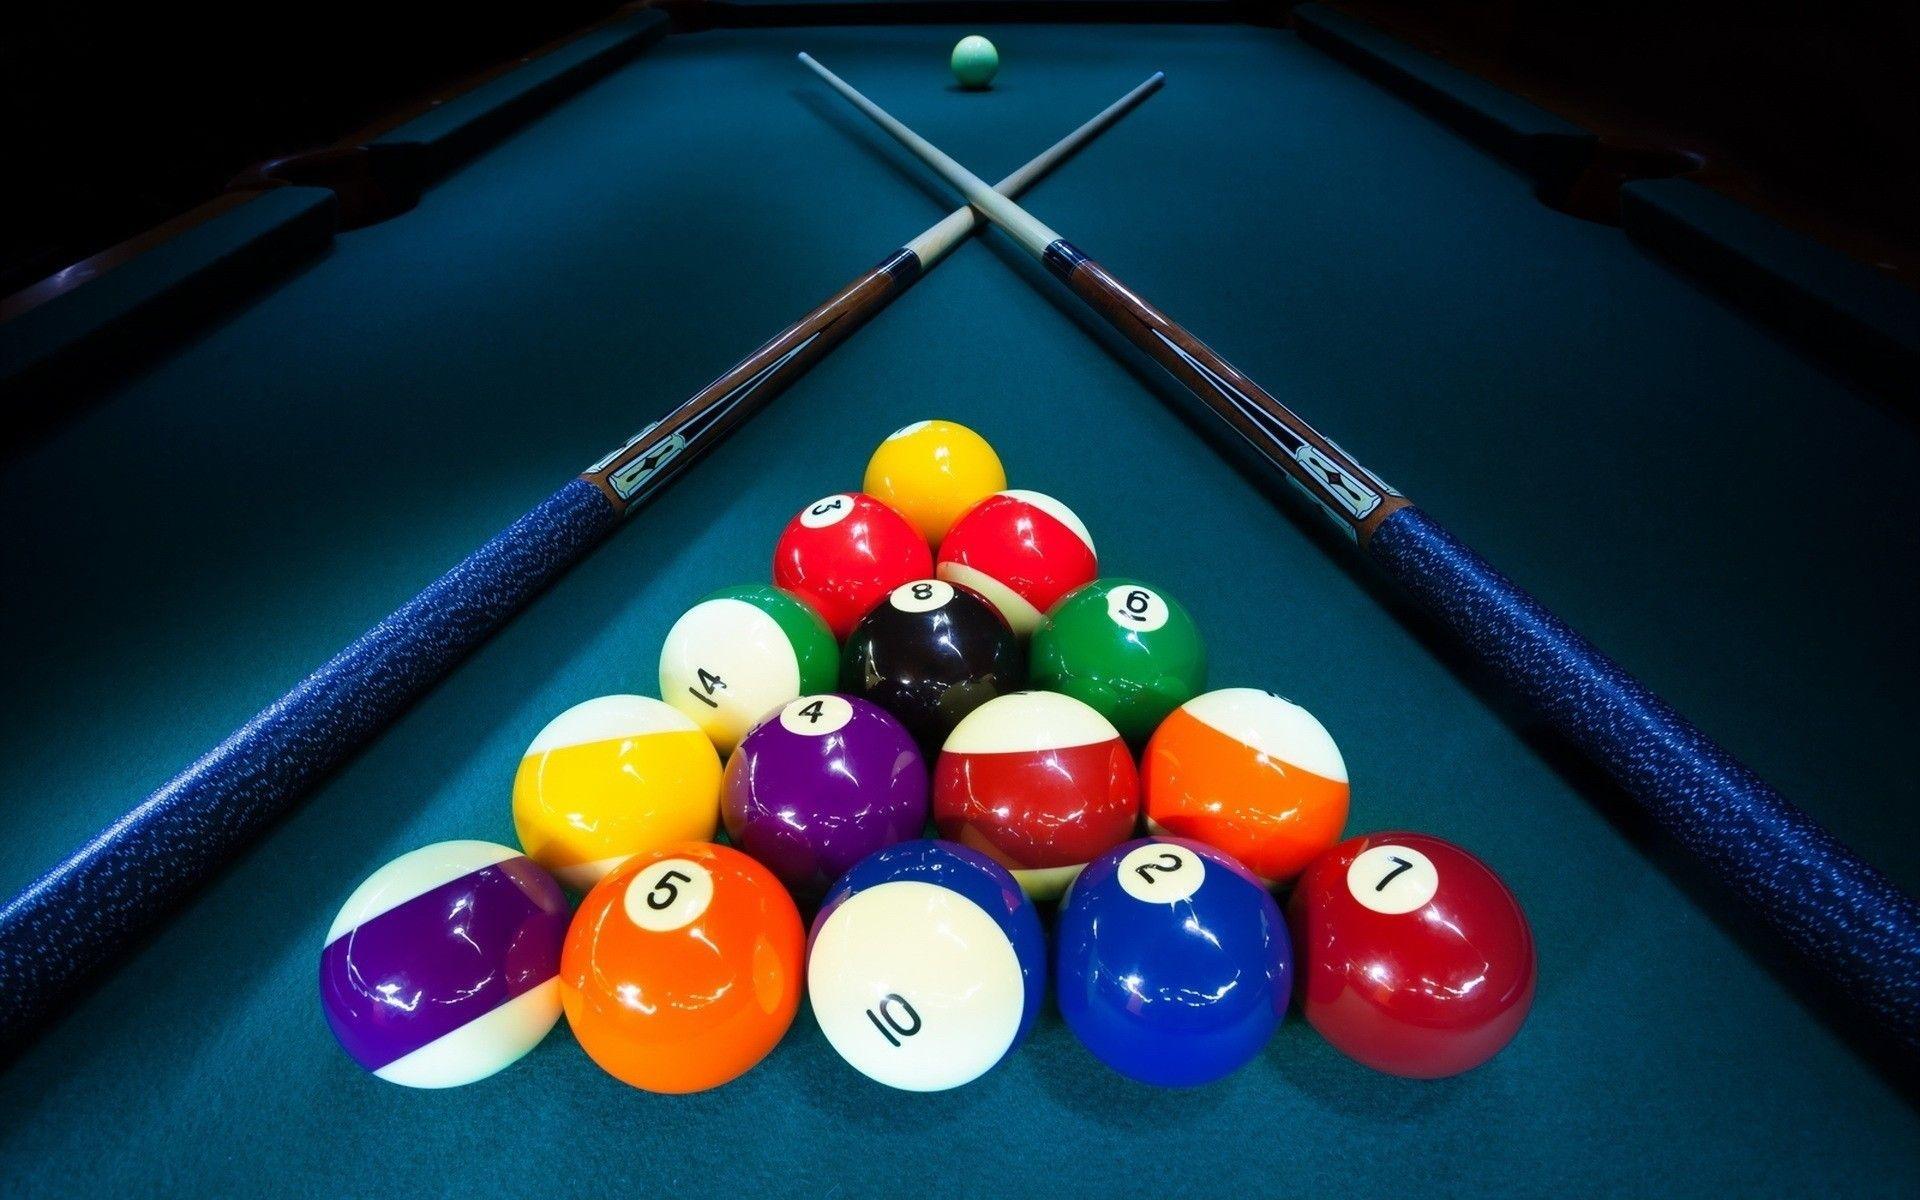 Billiards Game Table. Android wallpaper for free